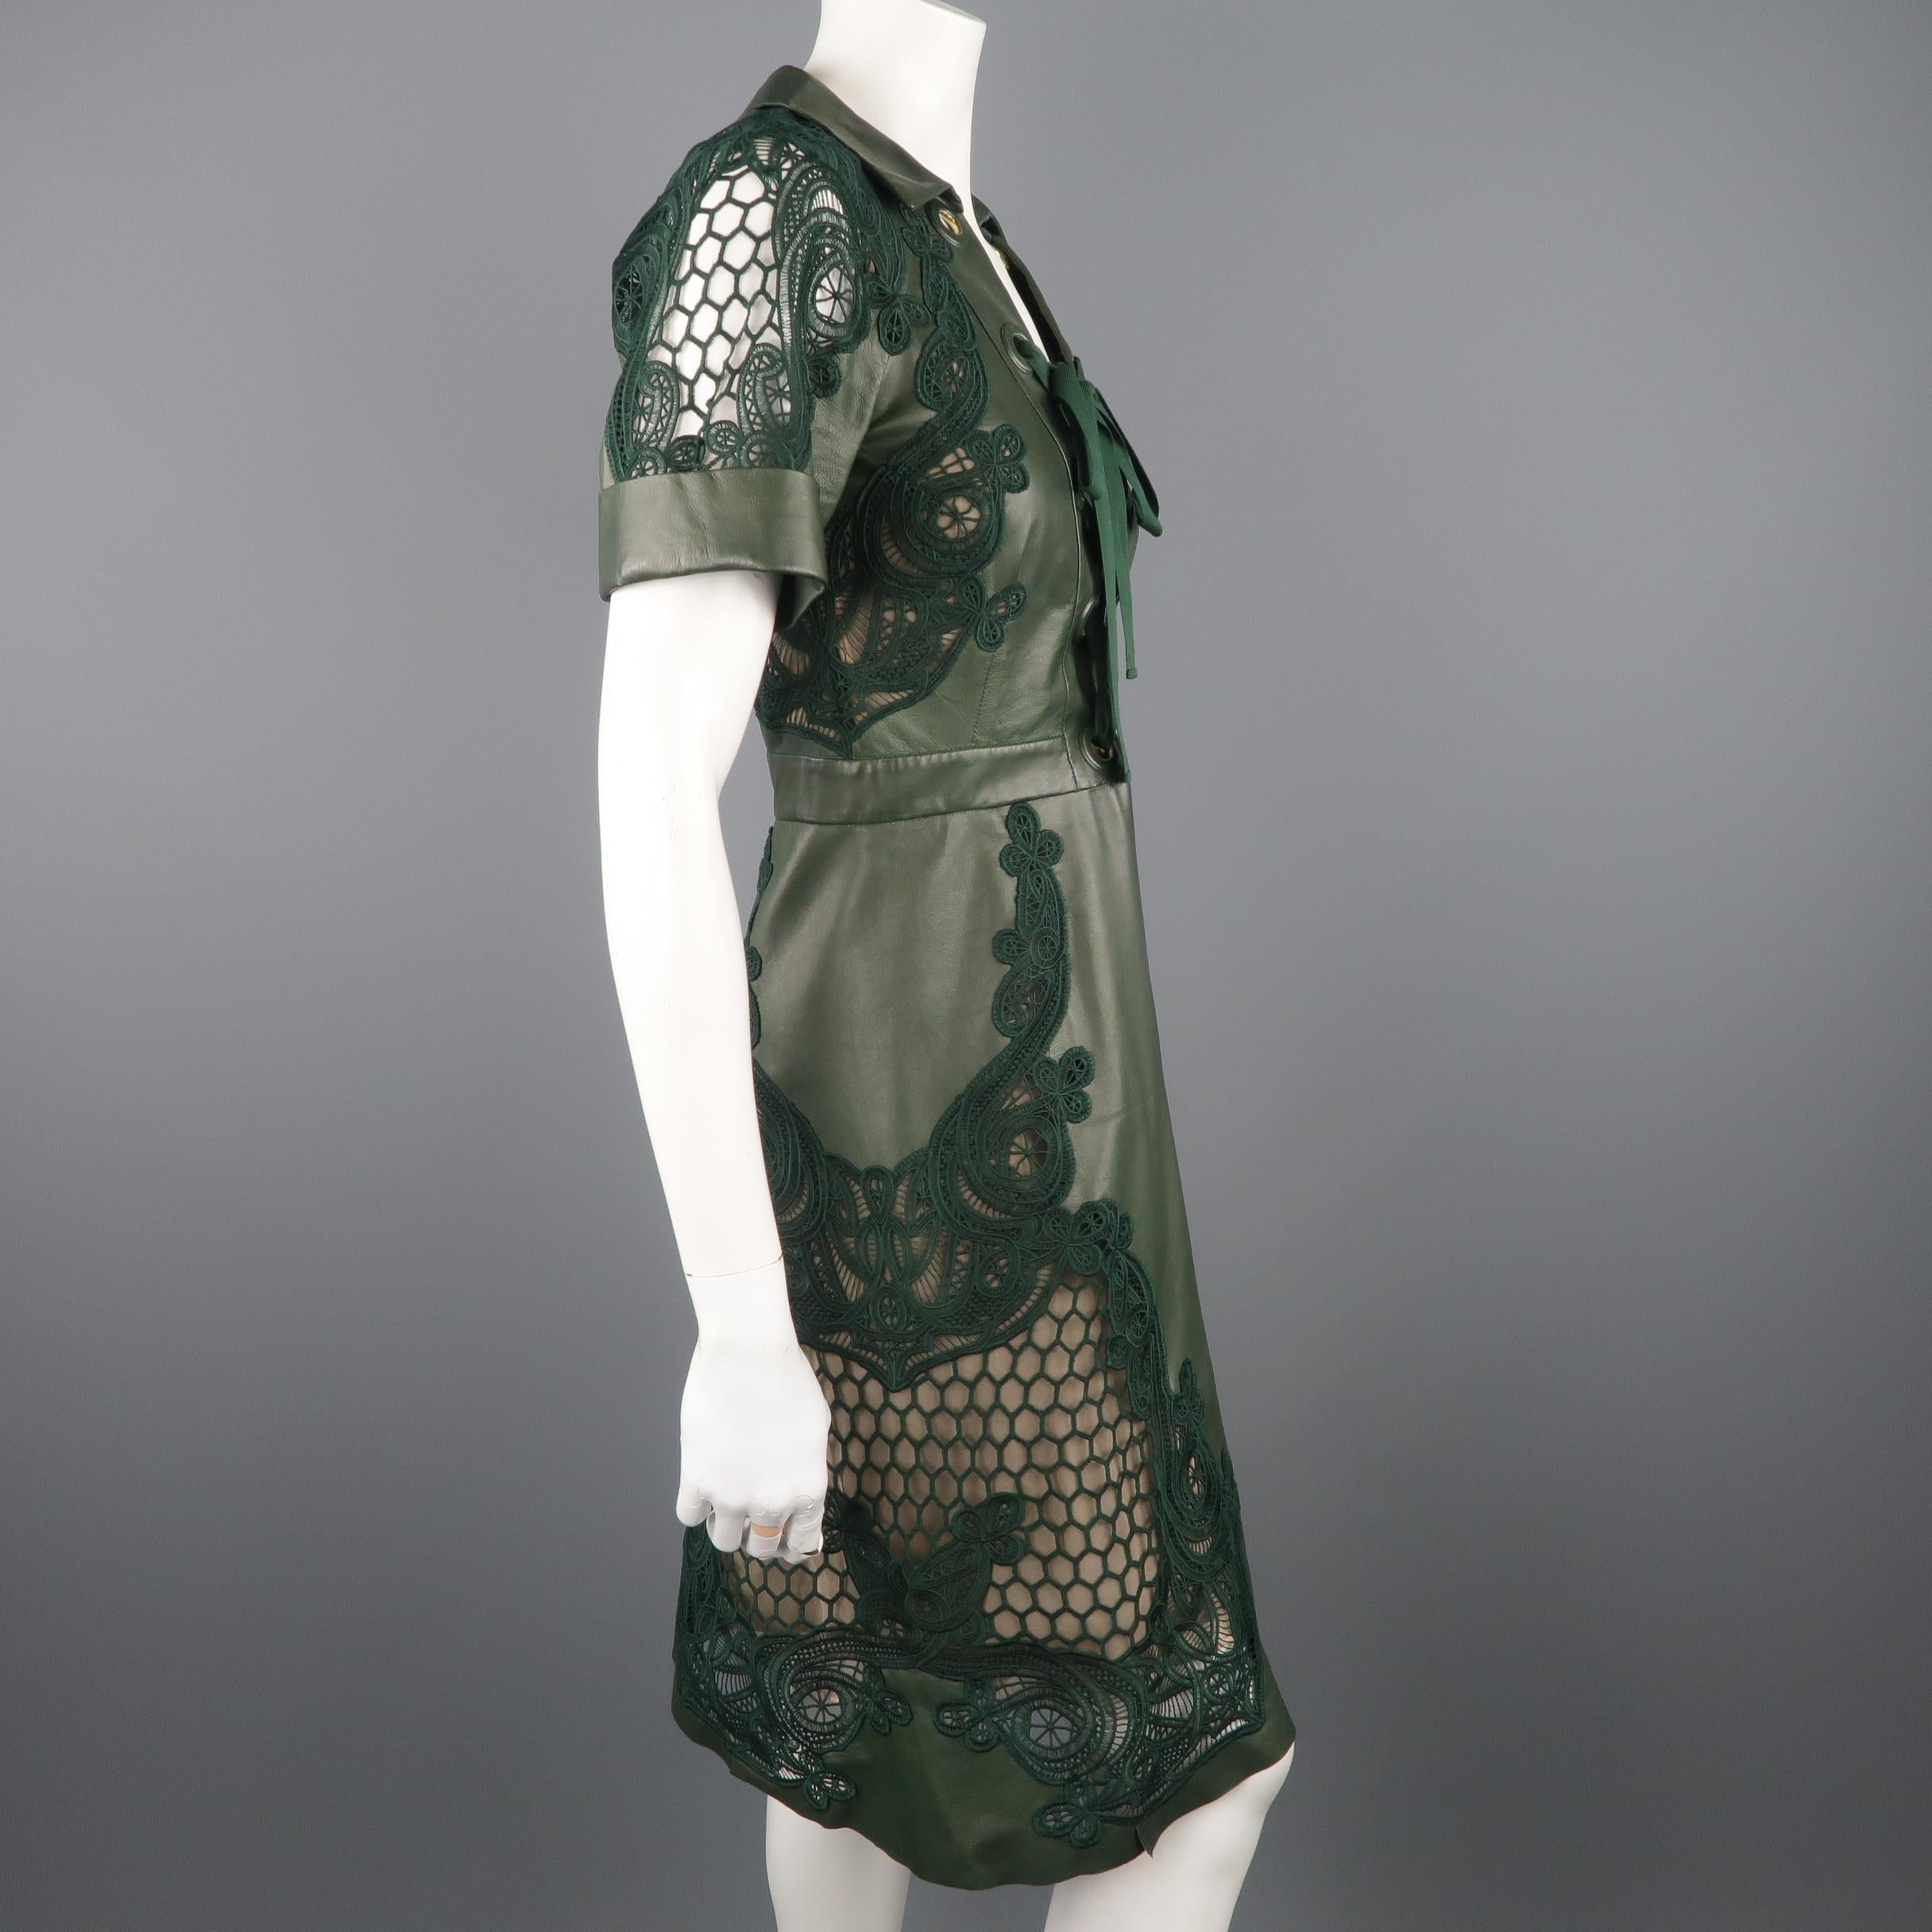 Women's Gucci Green Leather Broderie Anglaise Cocktail Dress, Spring 2015 Runway